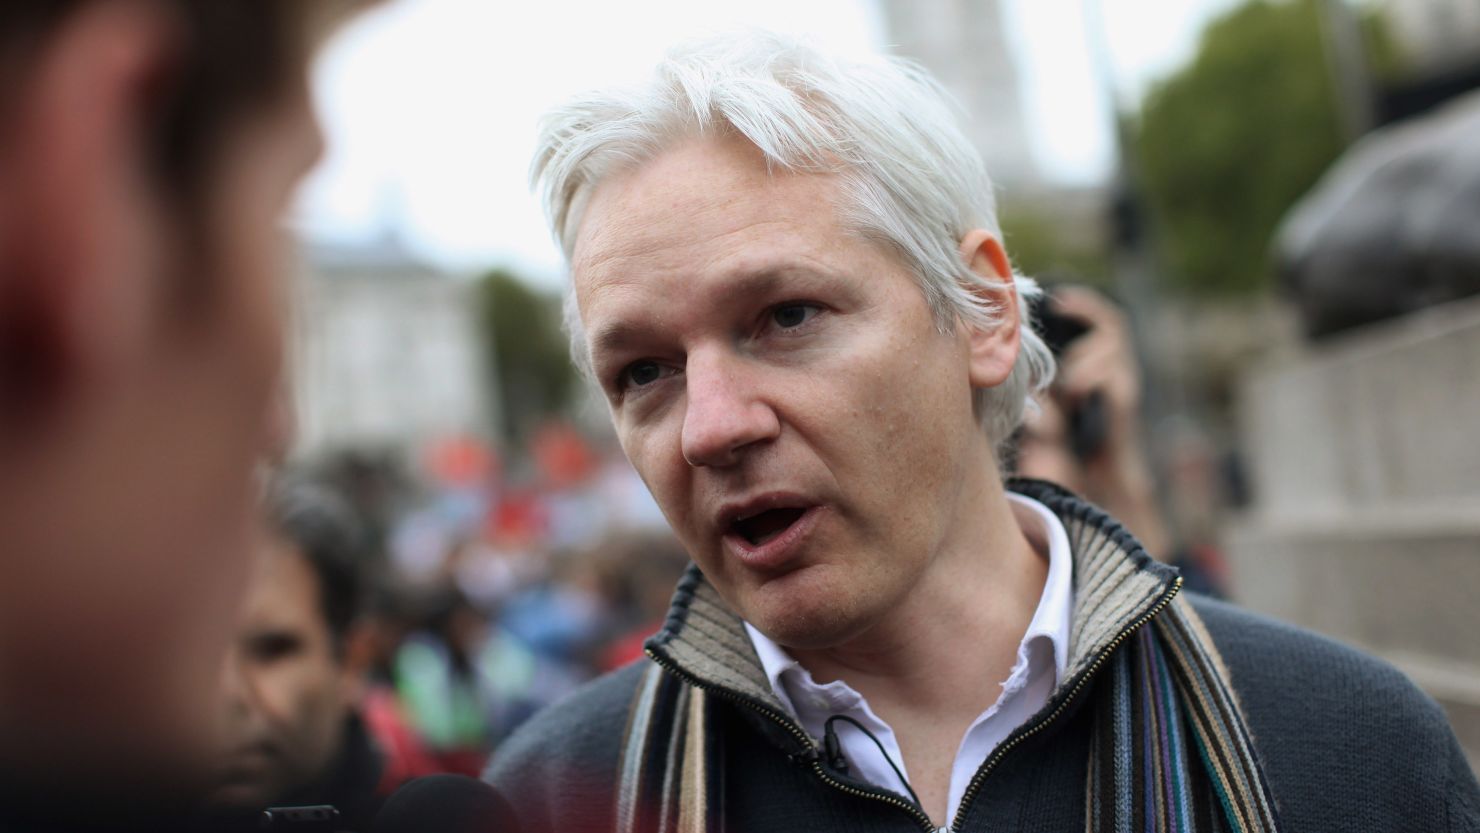 Julian Assange is seeking to avoid being sent to Sweden over claims of sexual assault.